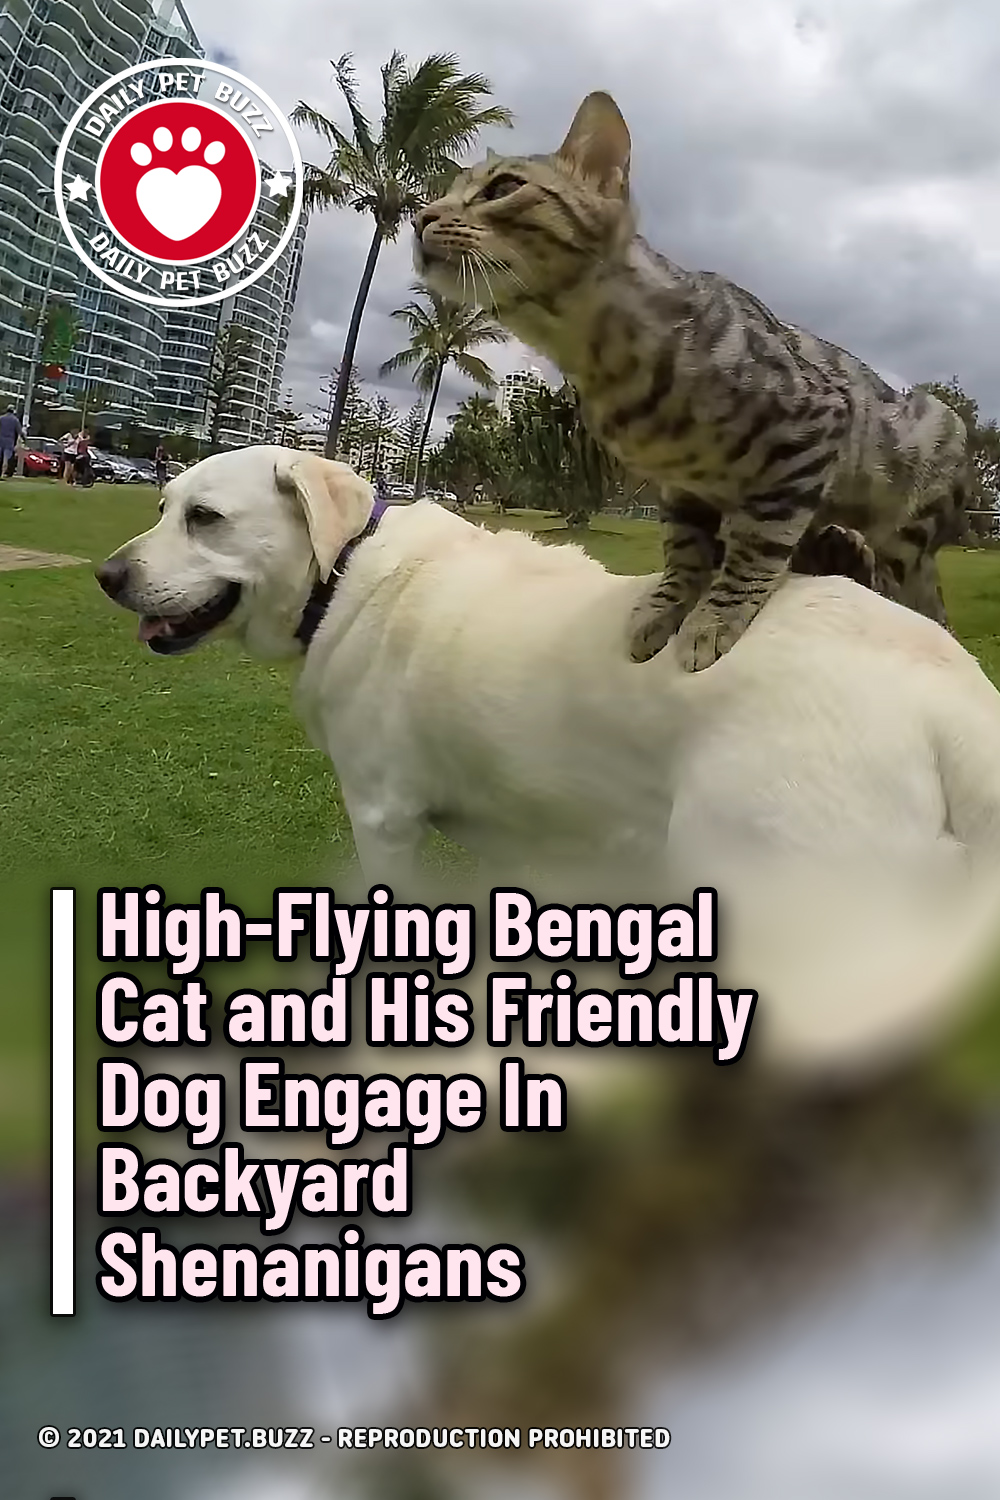 High-Flying Bengal Cat and His Friendly Dog Engage In Backyard Shenanigans